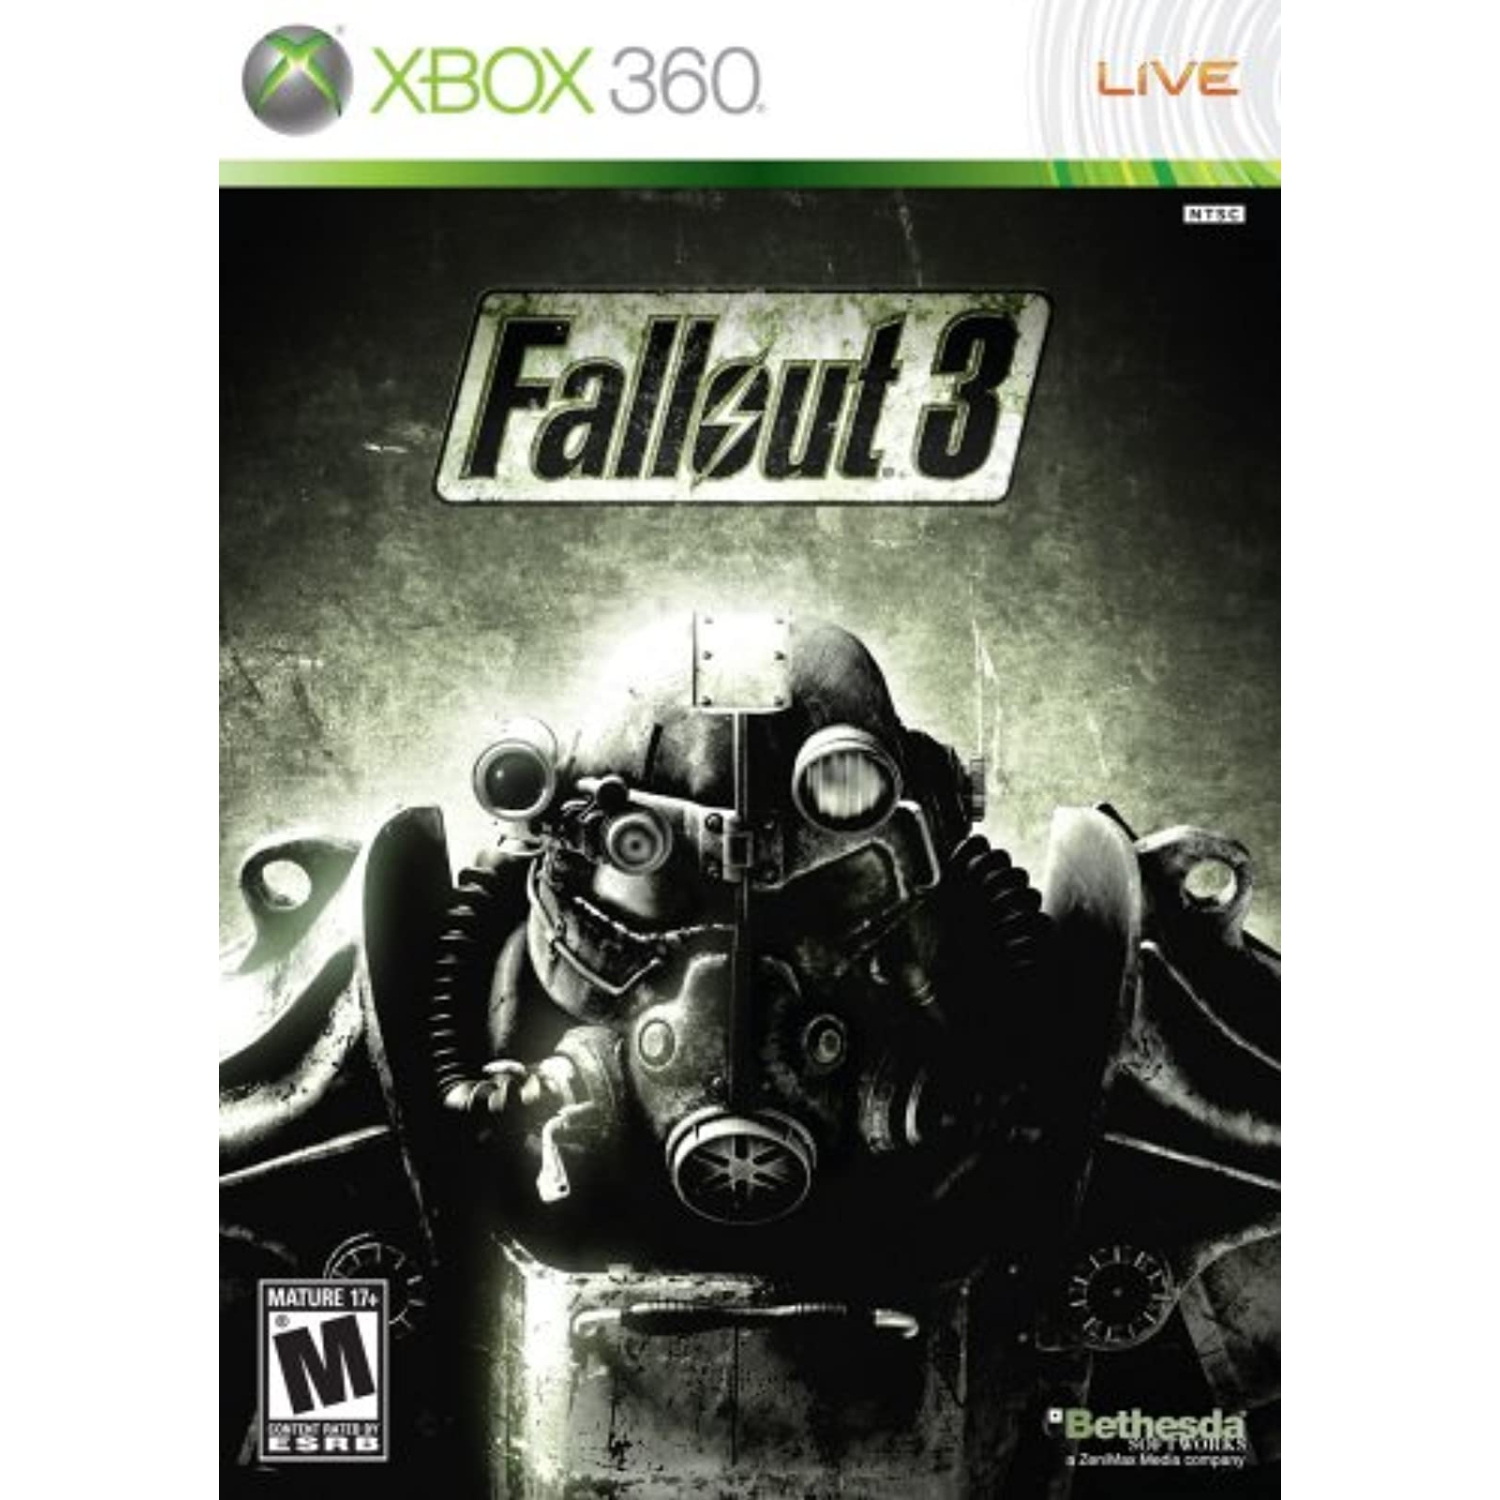 Previously Played - Fallout 3 Game For Xbox 360 With Manual and Case